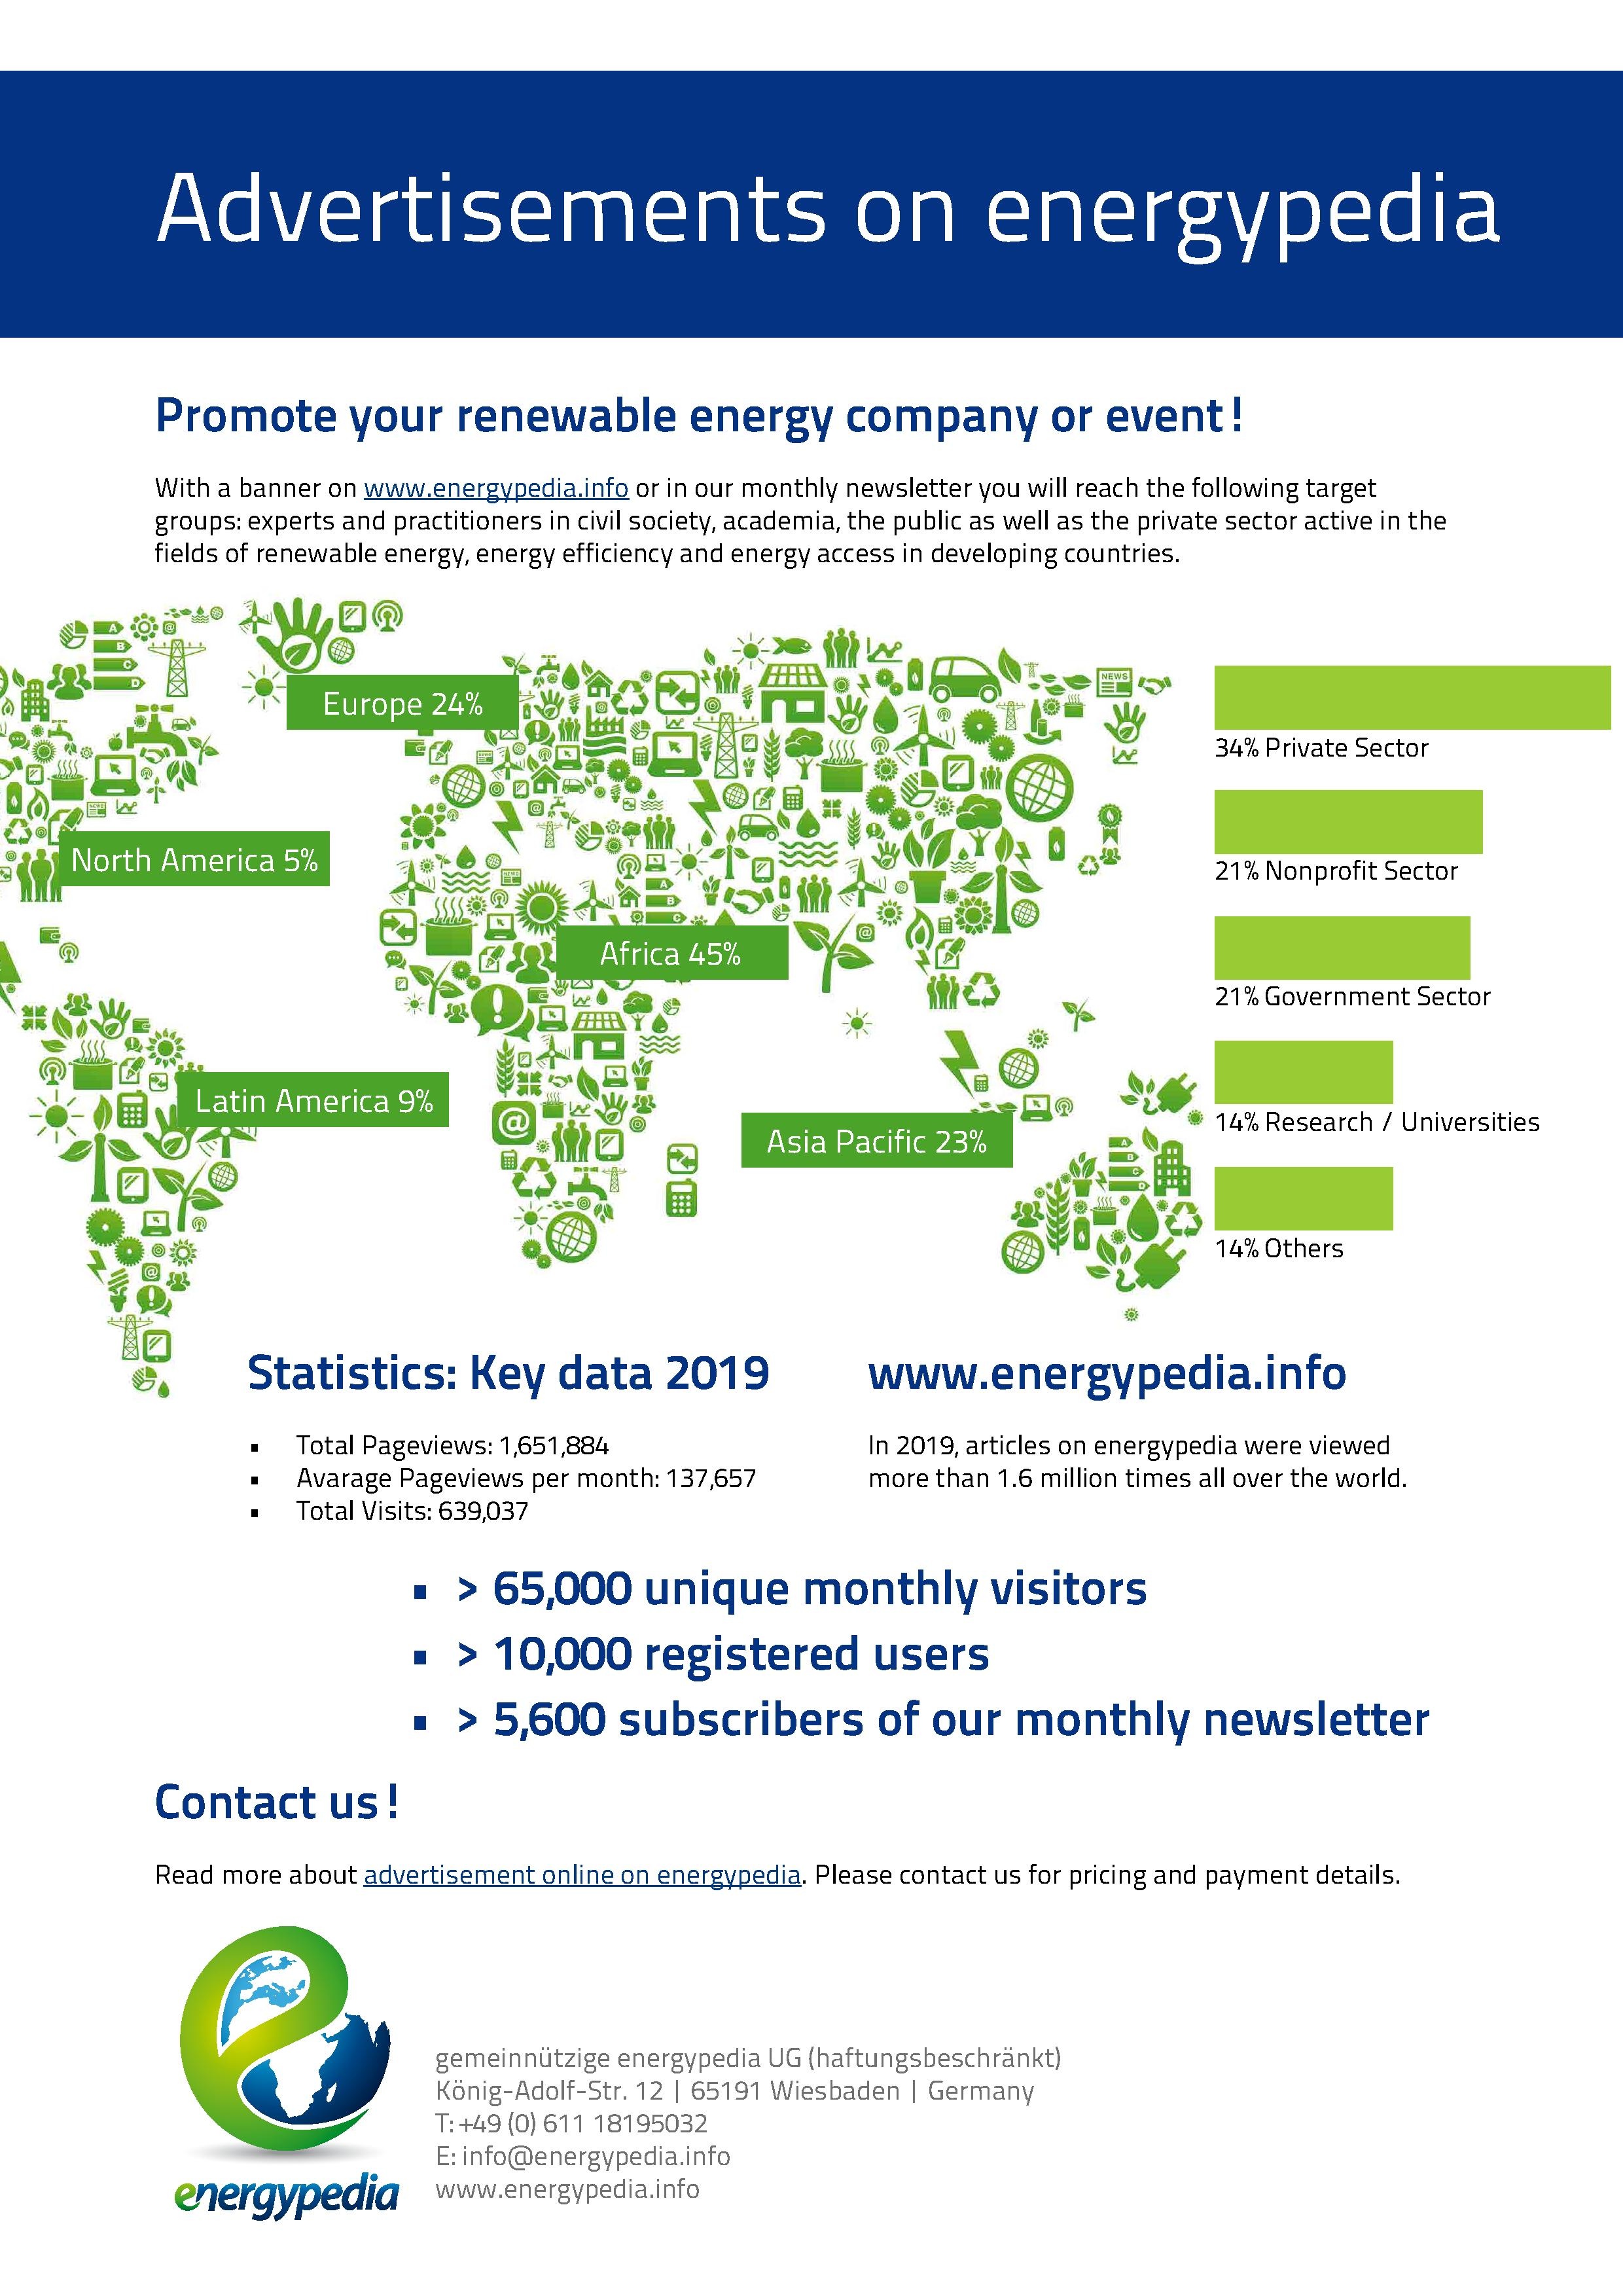 Promote your renewable energy company or event!